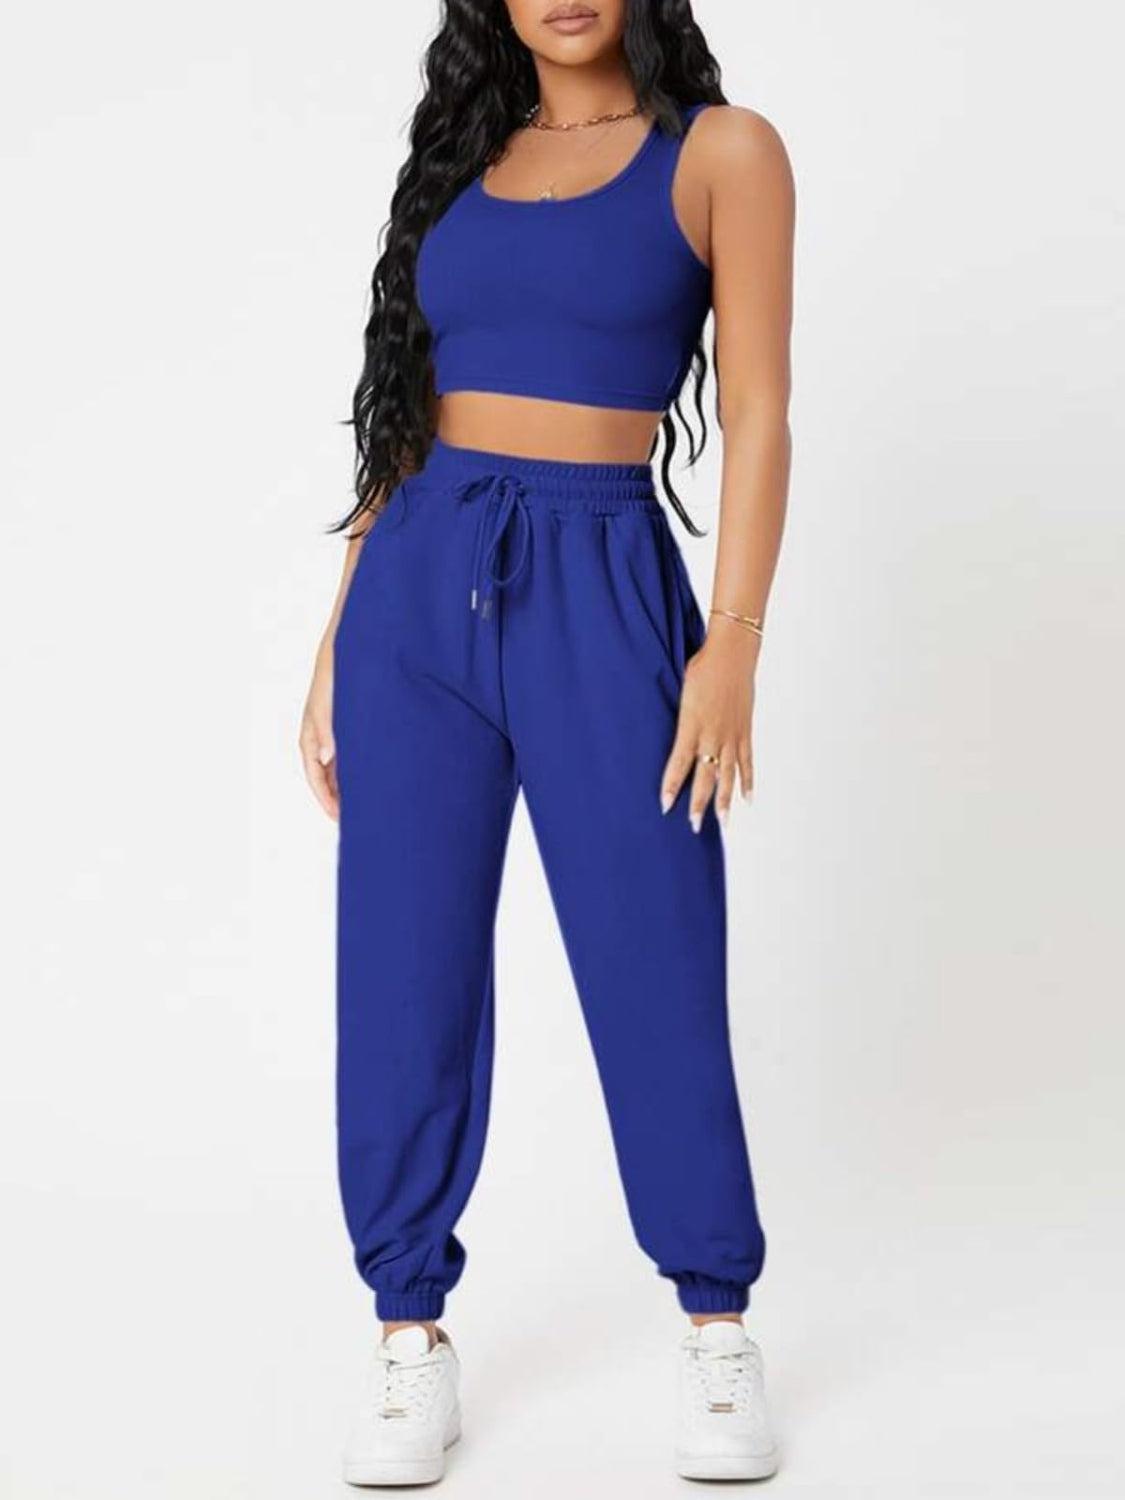 a woman wearing a blue crop top and sweat pants